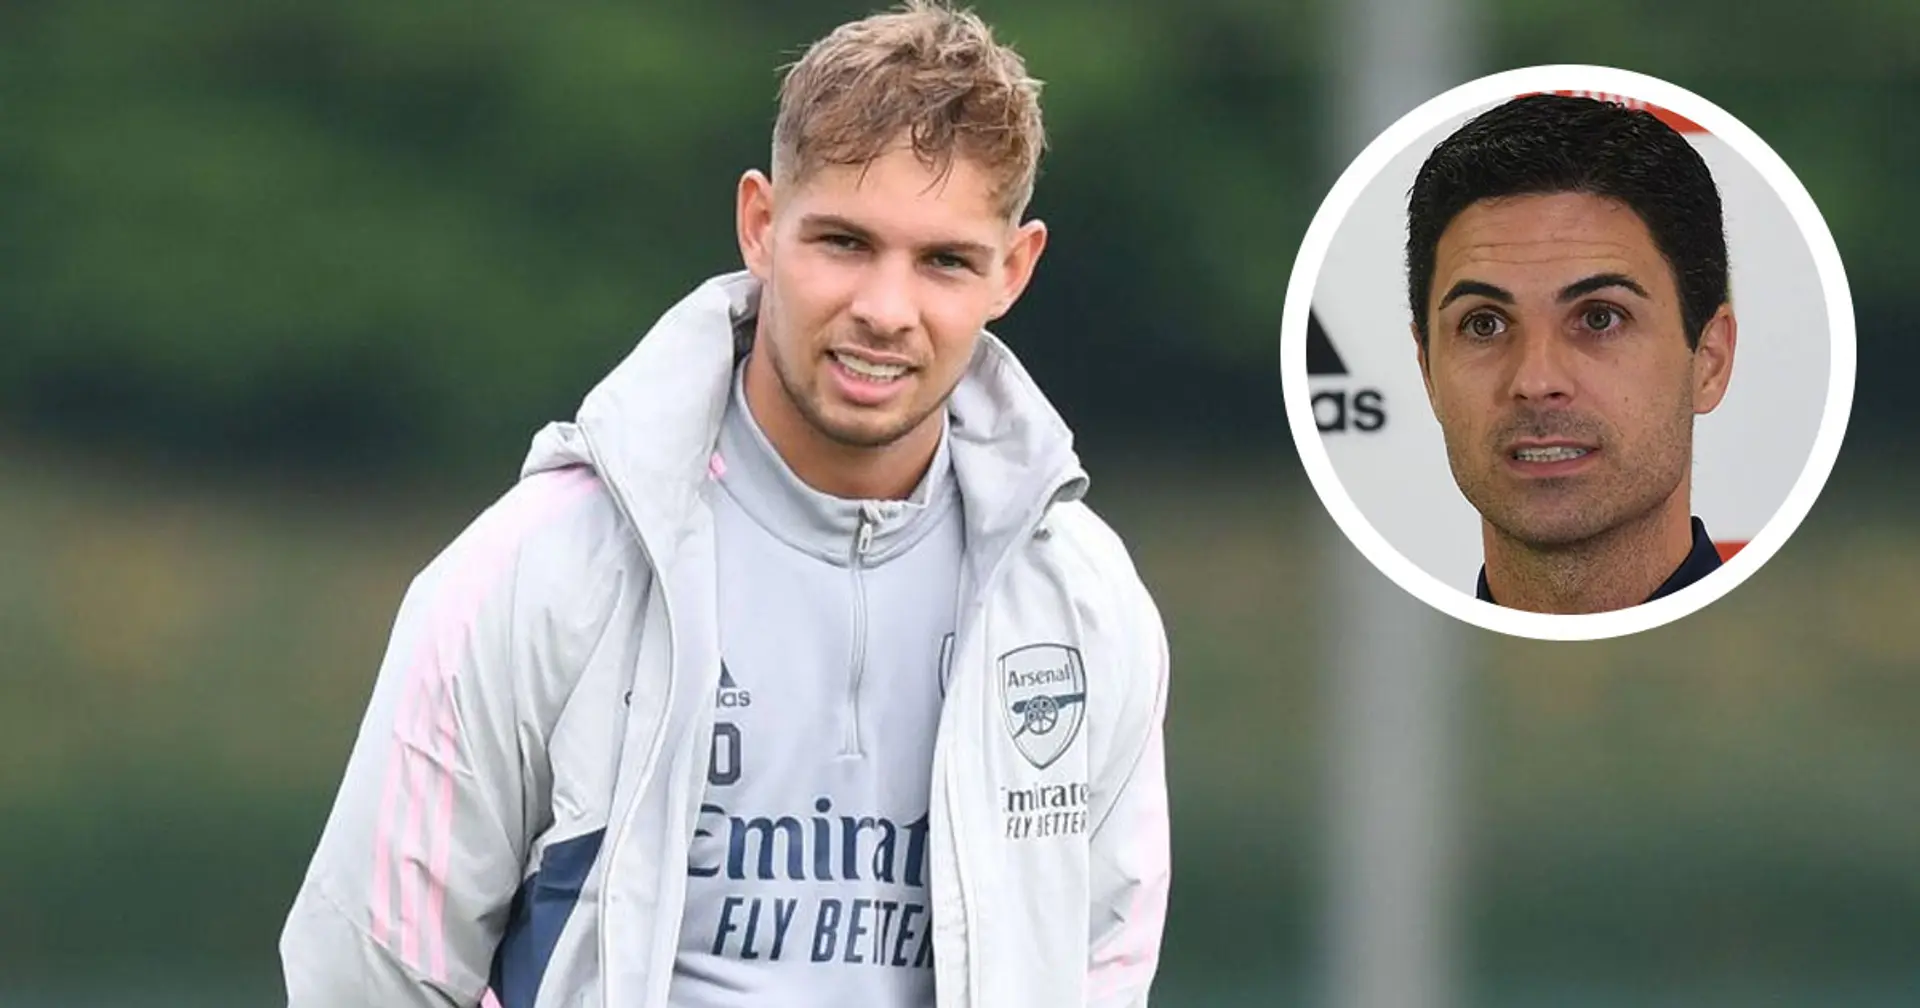 'He's made big steps in the last week': Arteta gives exciting update on Smith Rowe's return